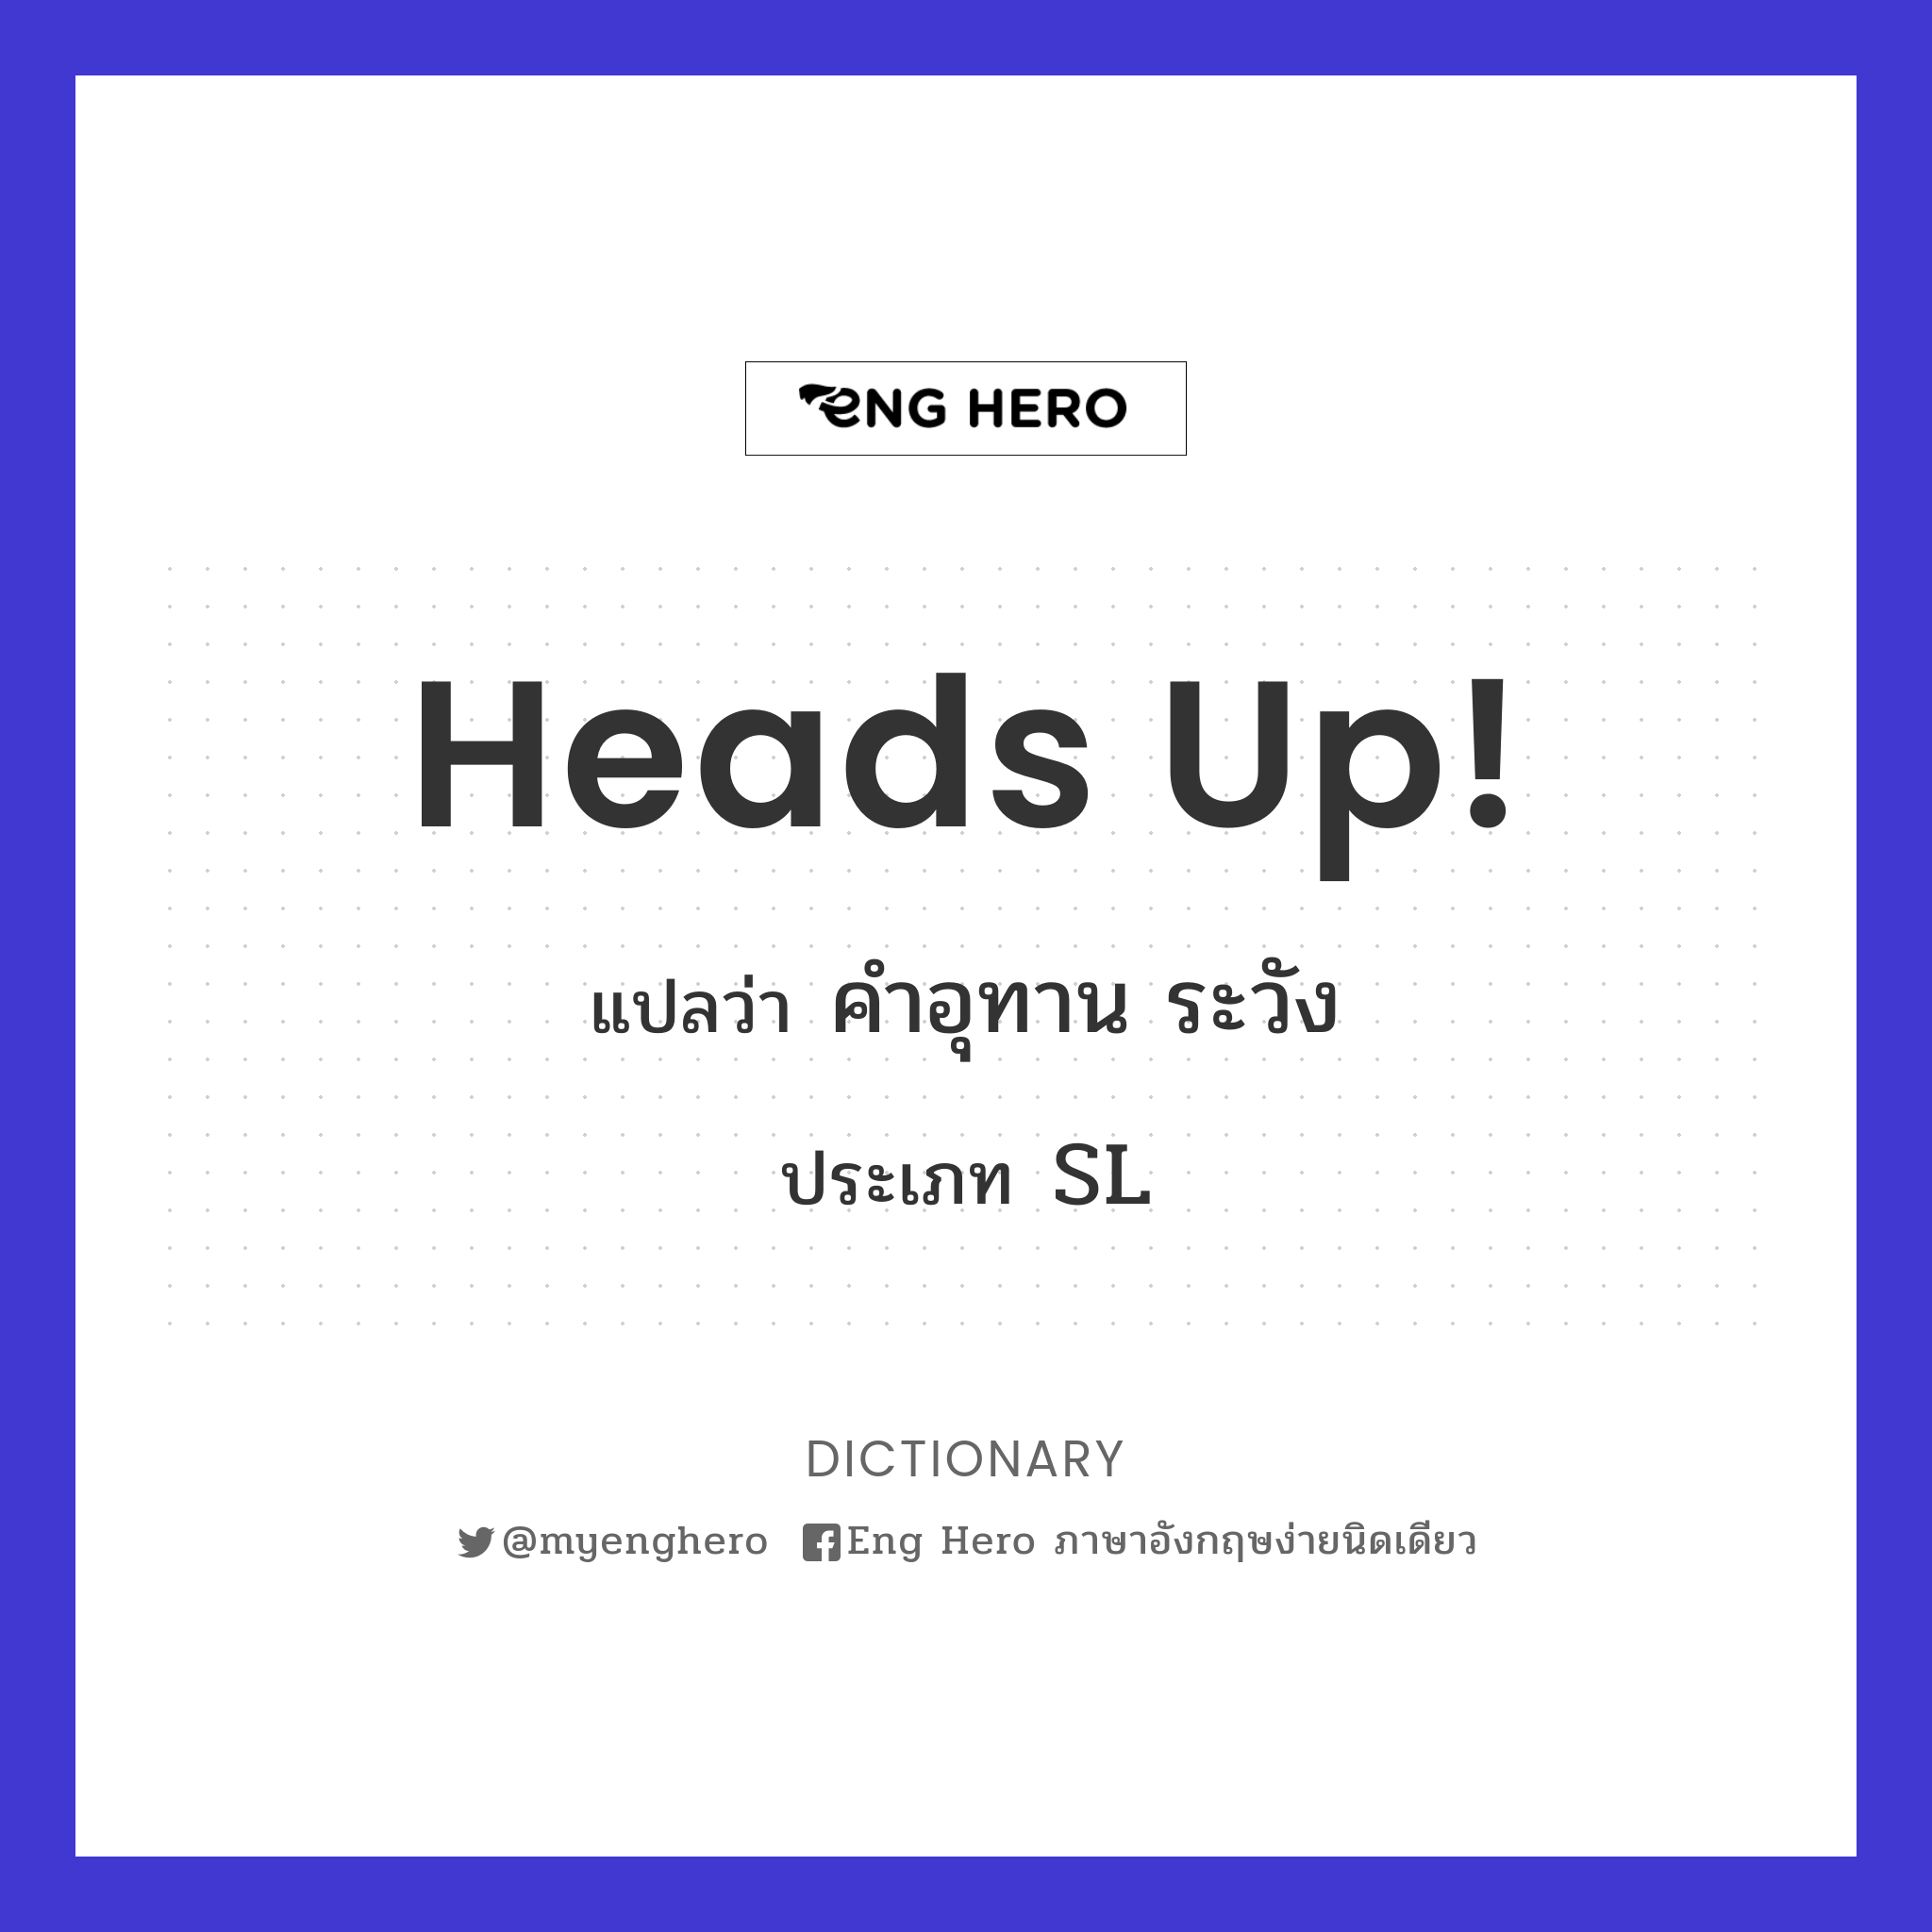 Heads up!